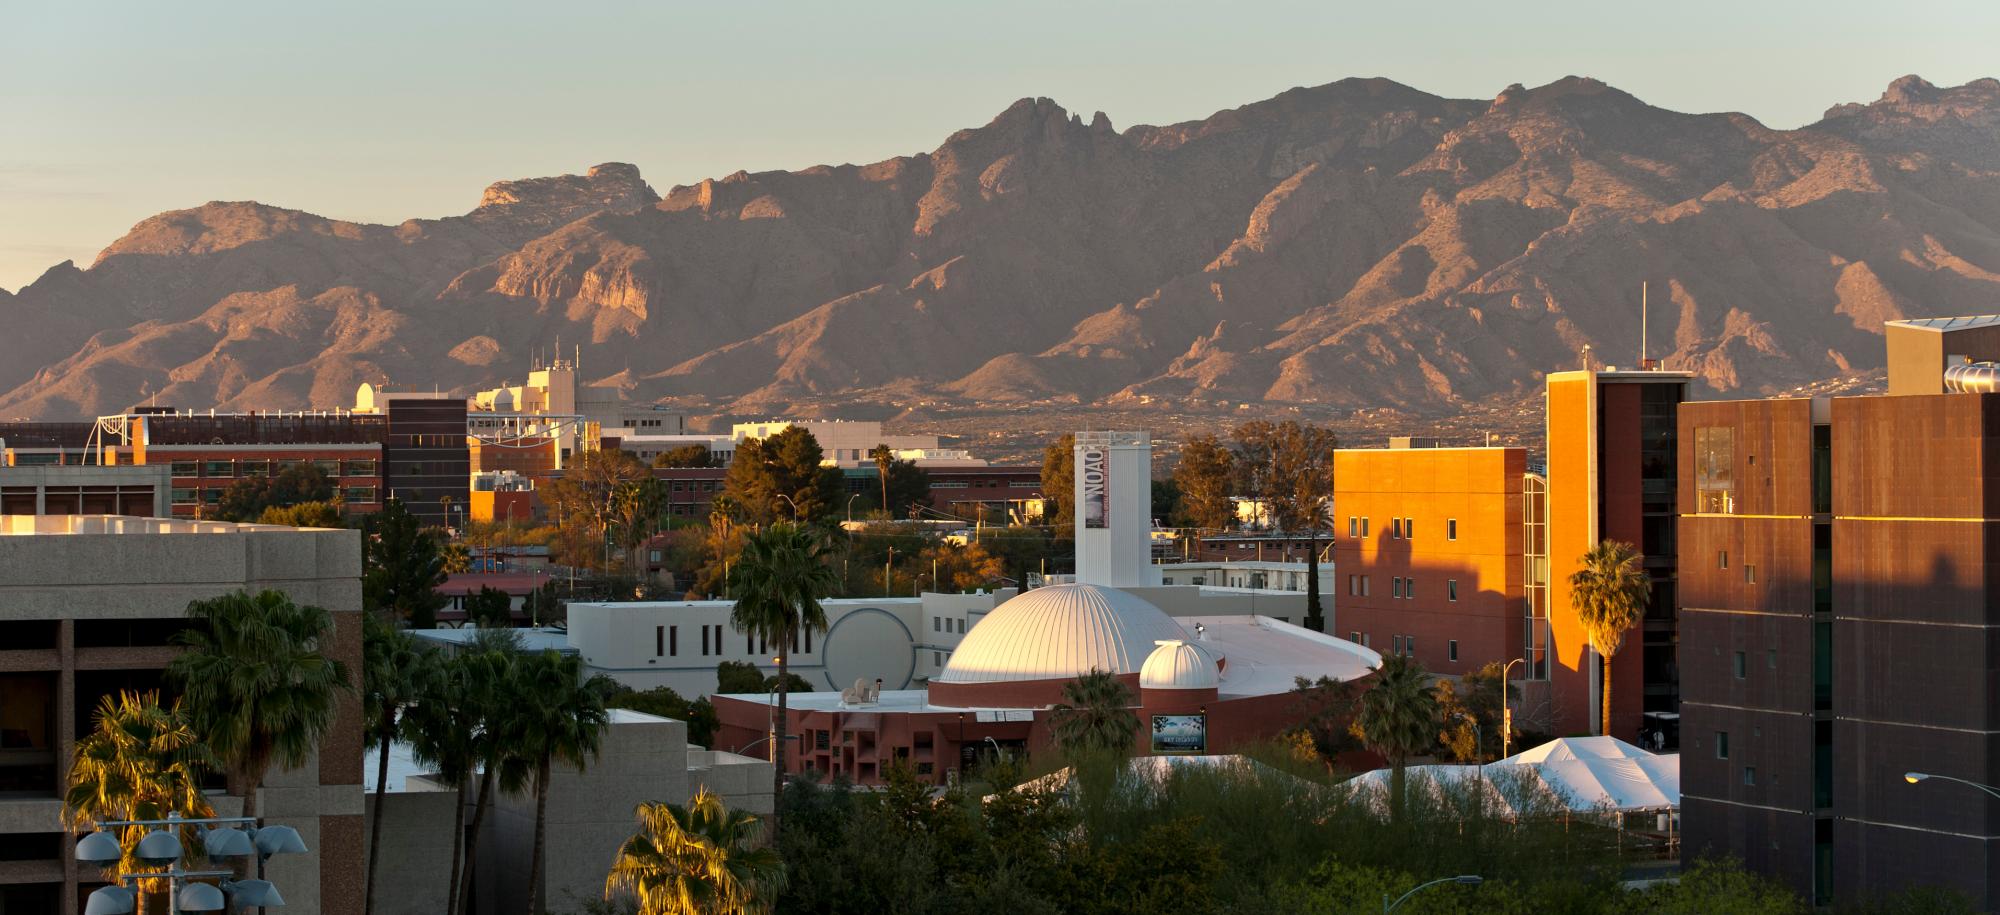 A view of the UArizona main campus and Catalina mountains